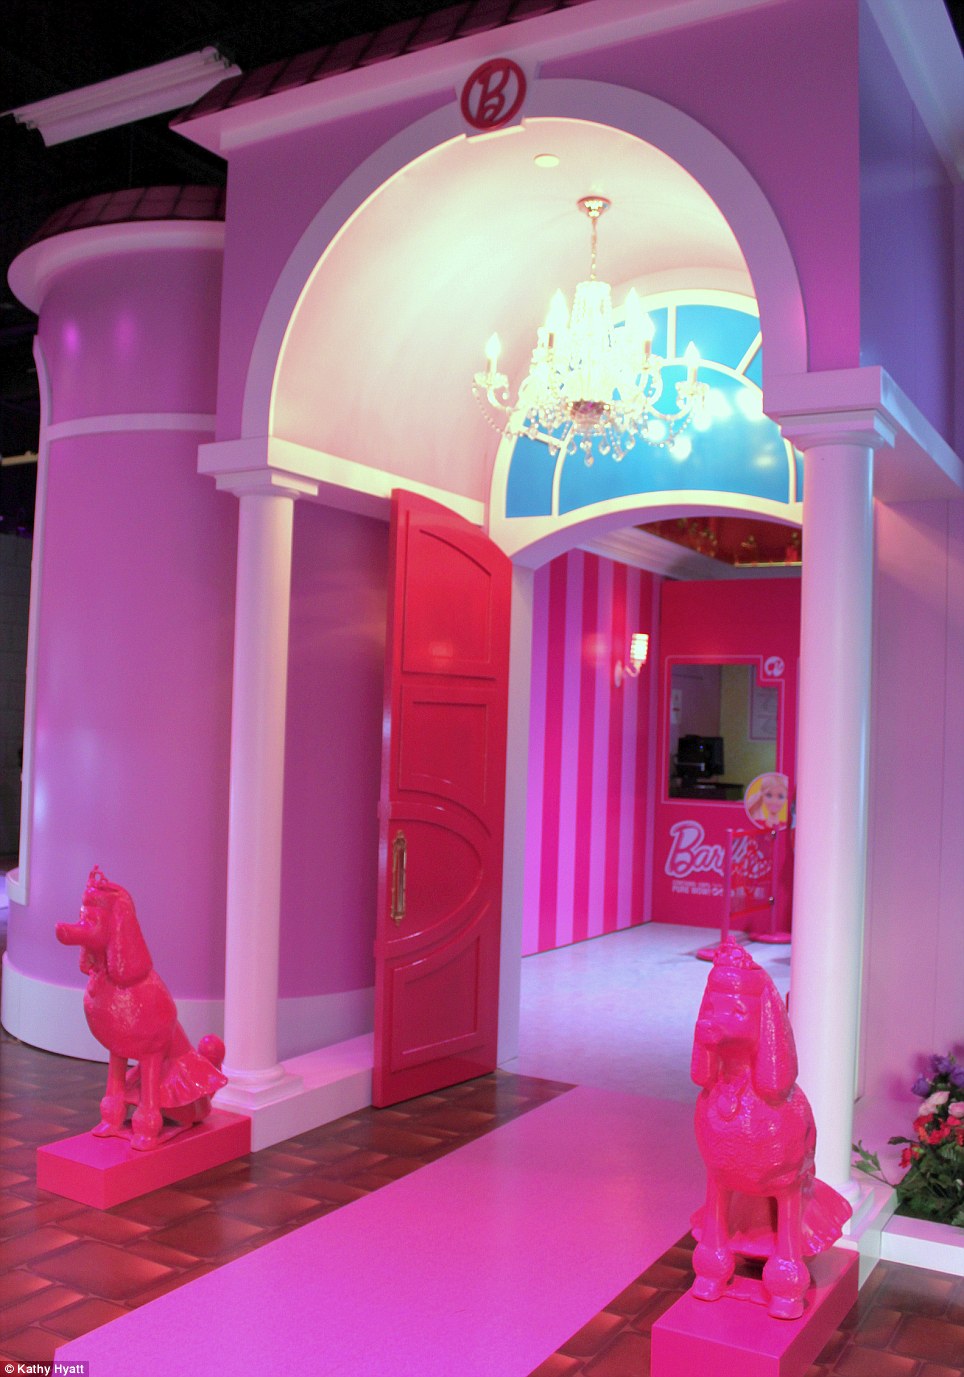 Barbie Dream House Pictures   Widescreen HD Wallpapers 964x1377